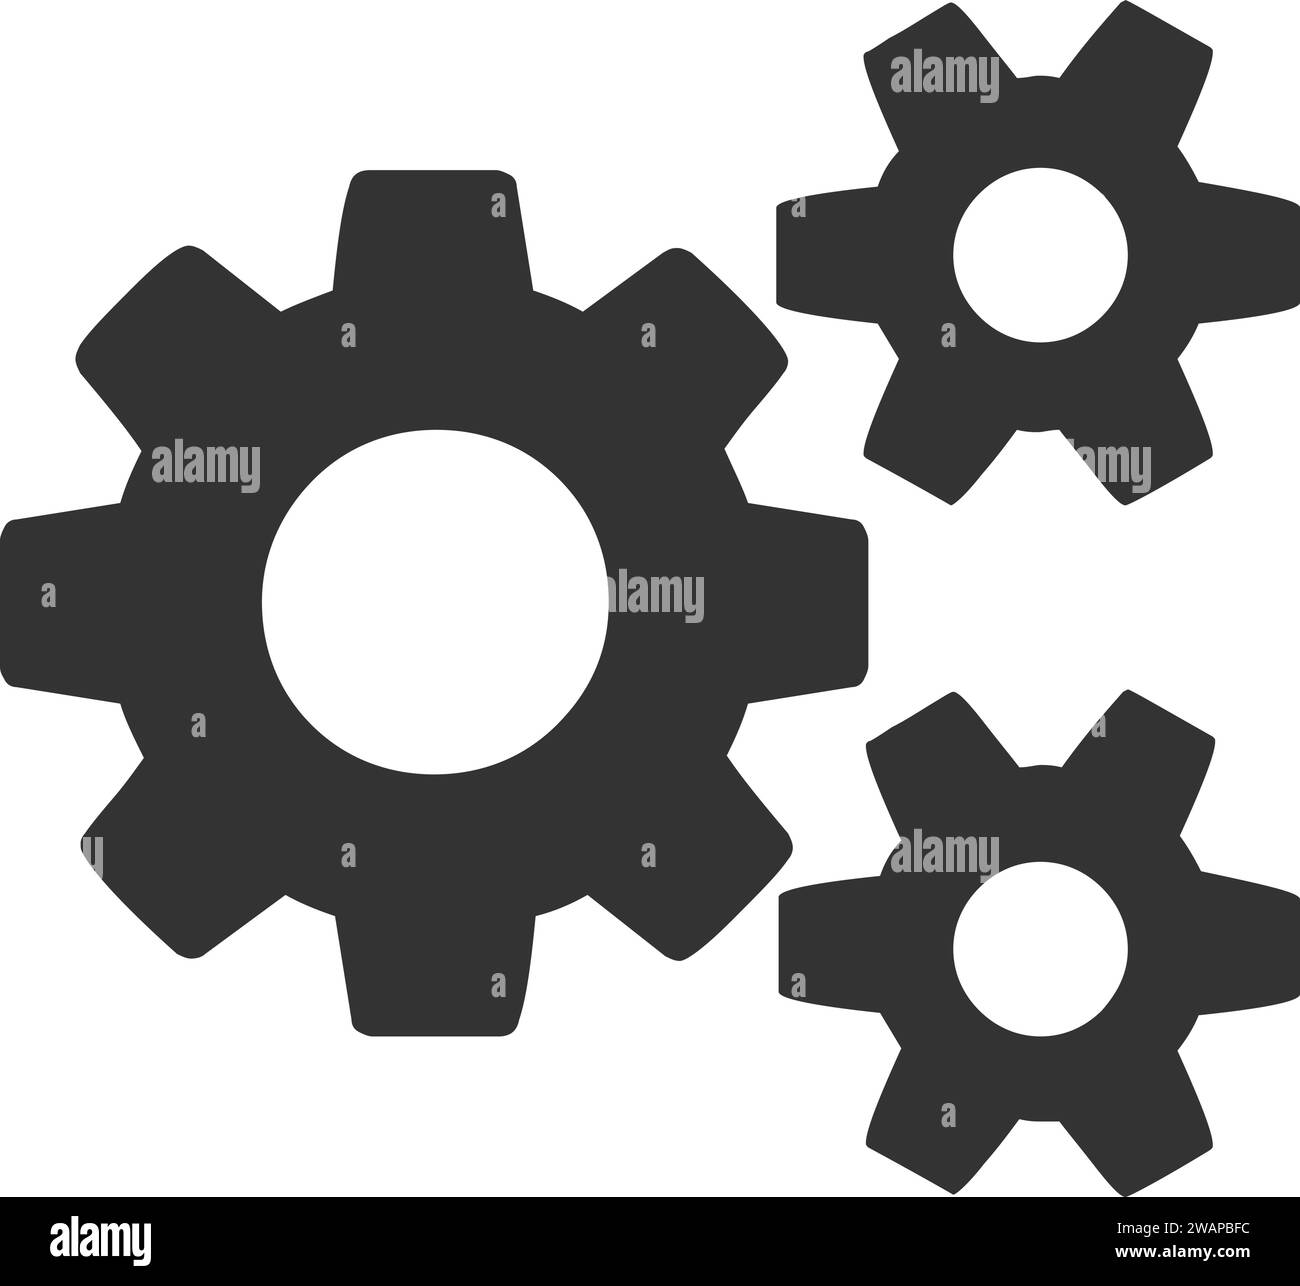 gears icon | Setting icon, Gear connection icon in vector Stock Vector